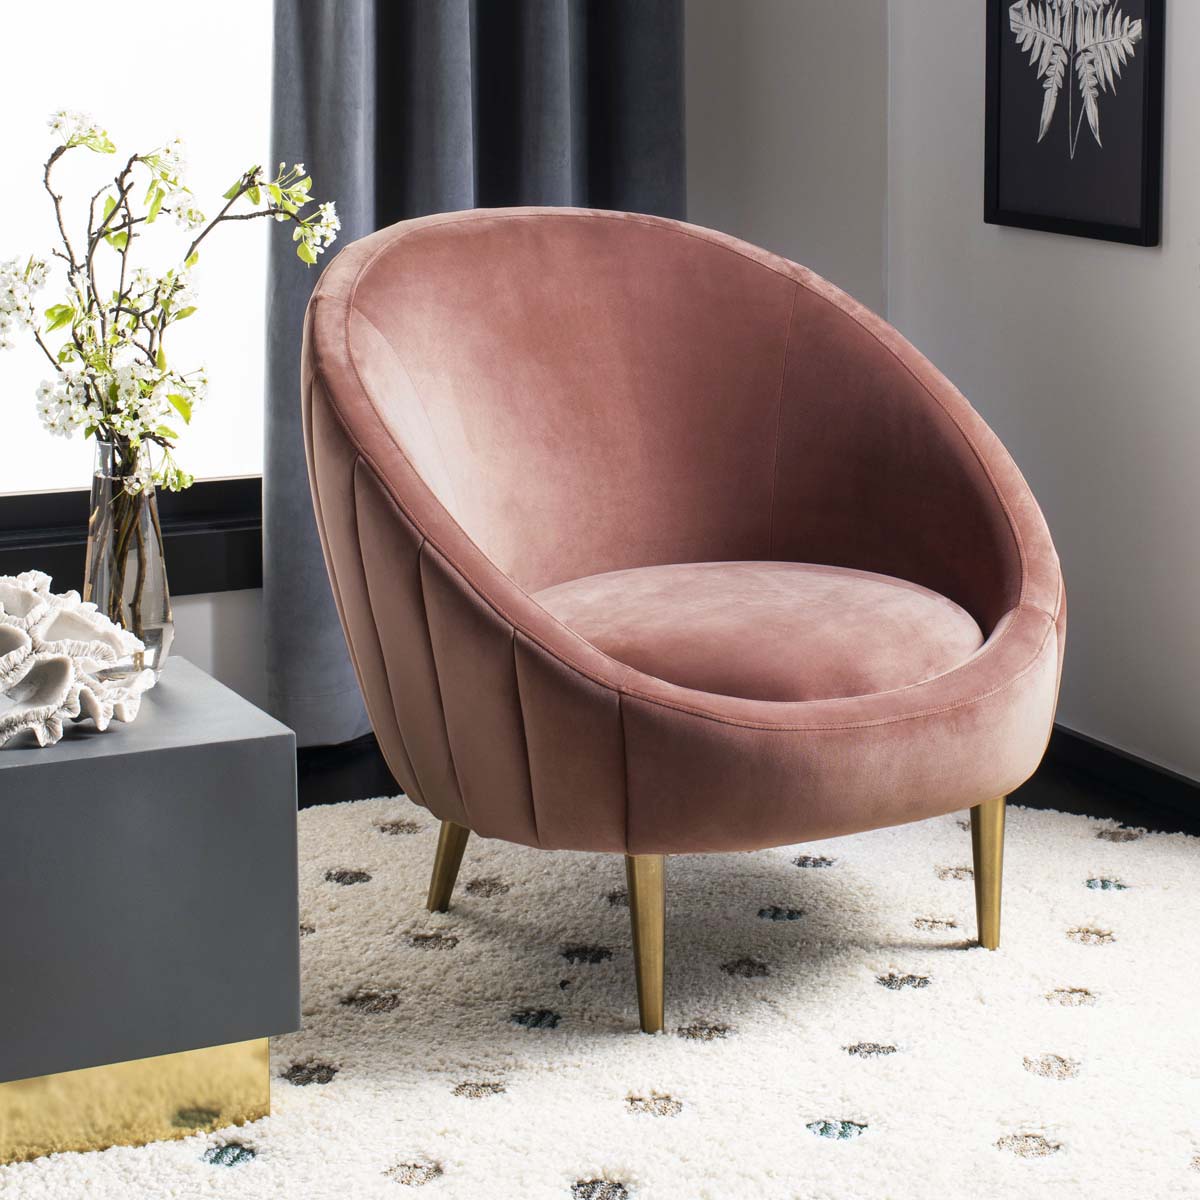 Safavieh Couture Razia Channel Tufted Tub Chair - Dusty Rose